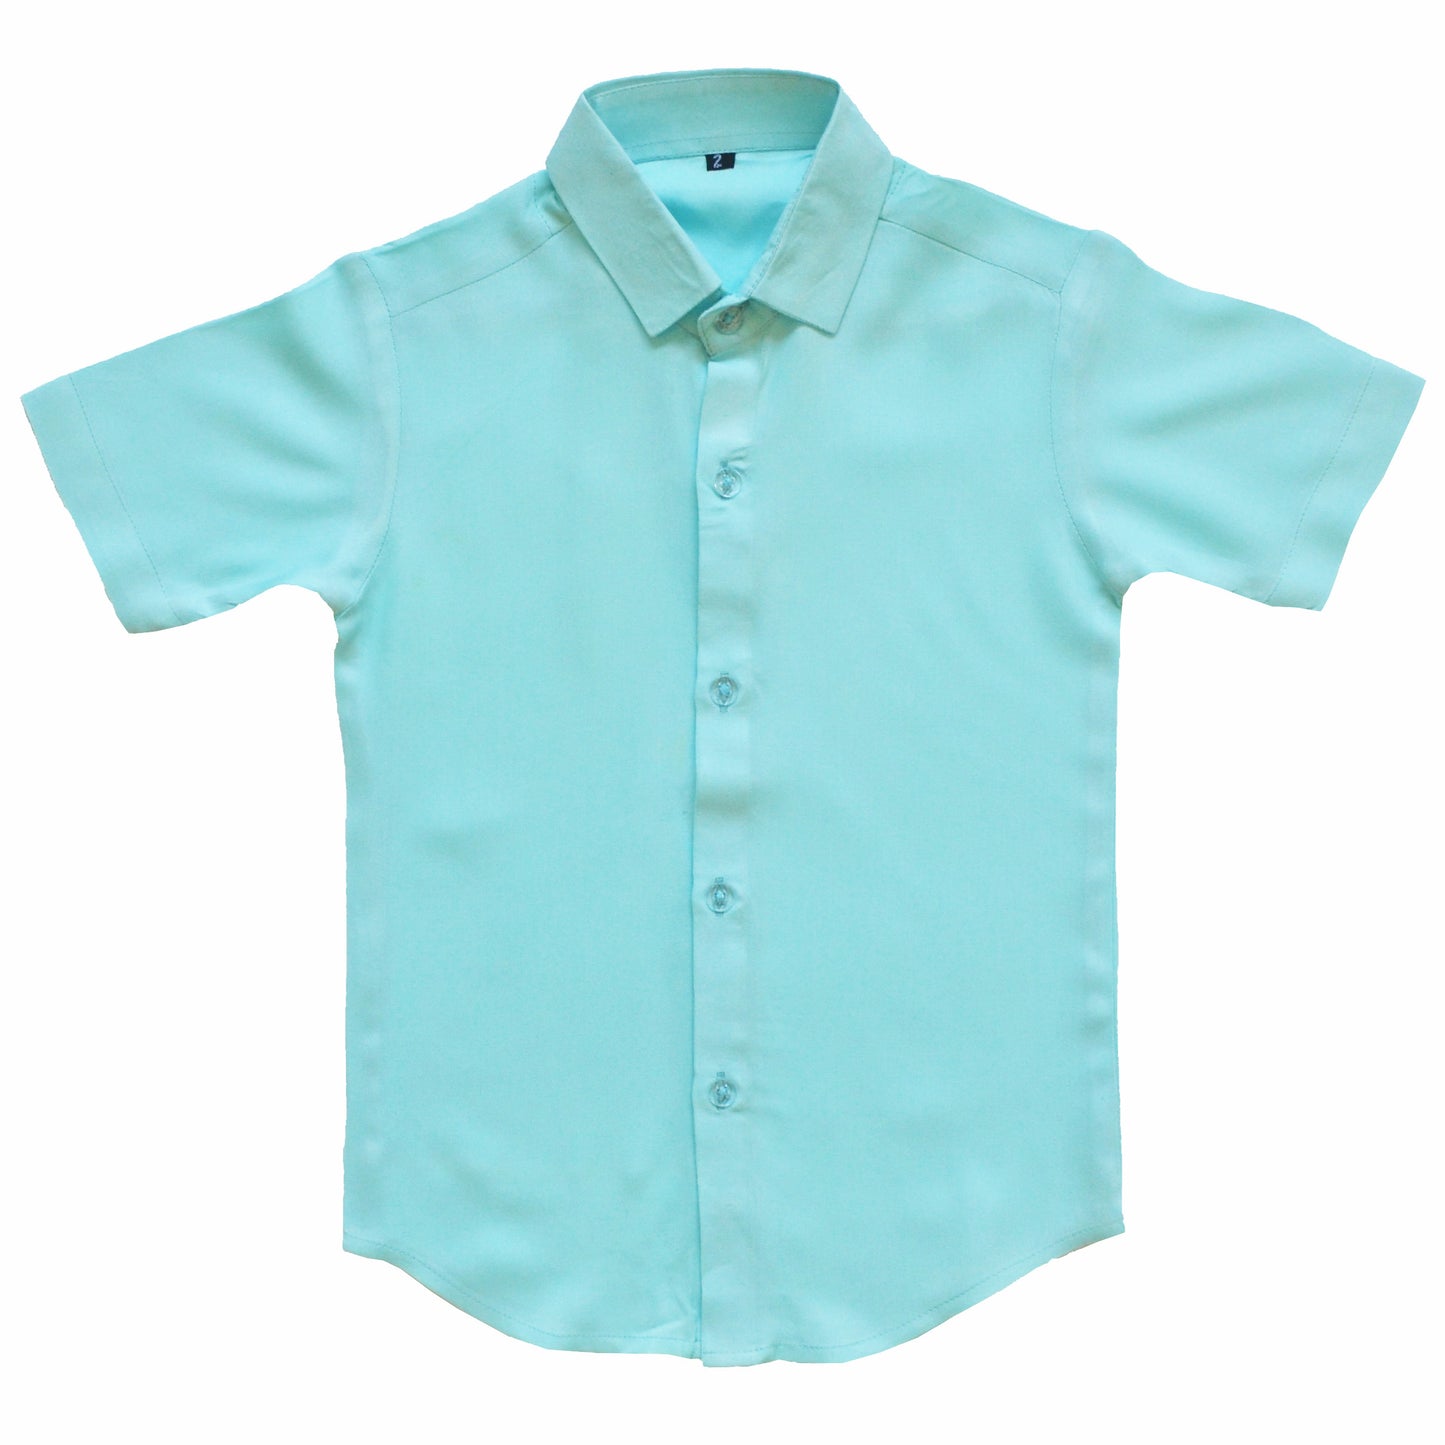 Pastel shade rayon shirts for boys - Combo of 2 - Blue & Pink